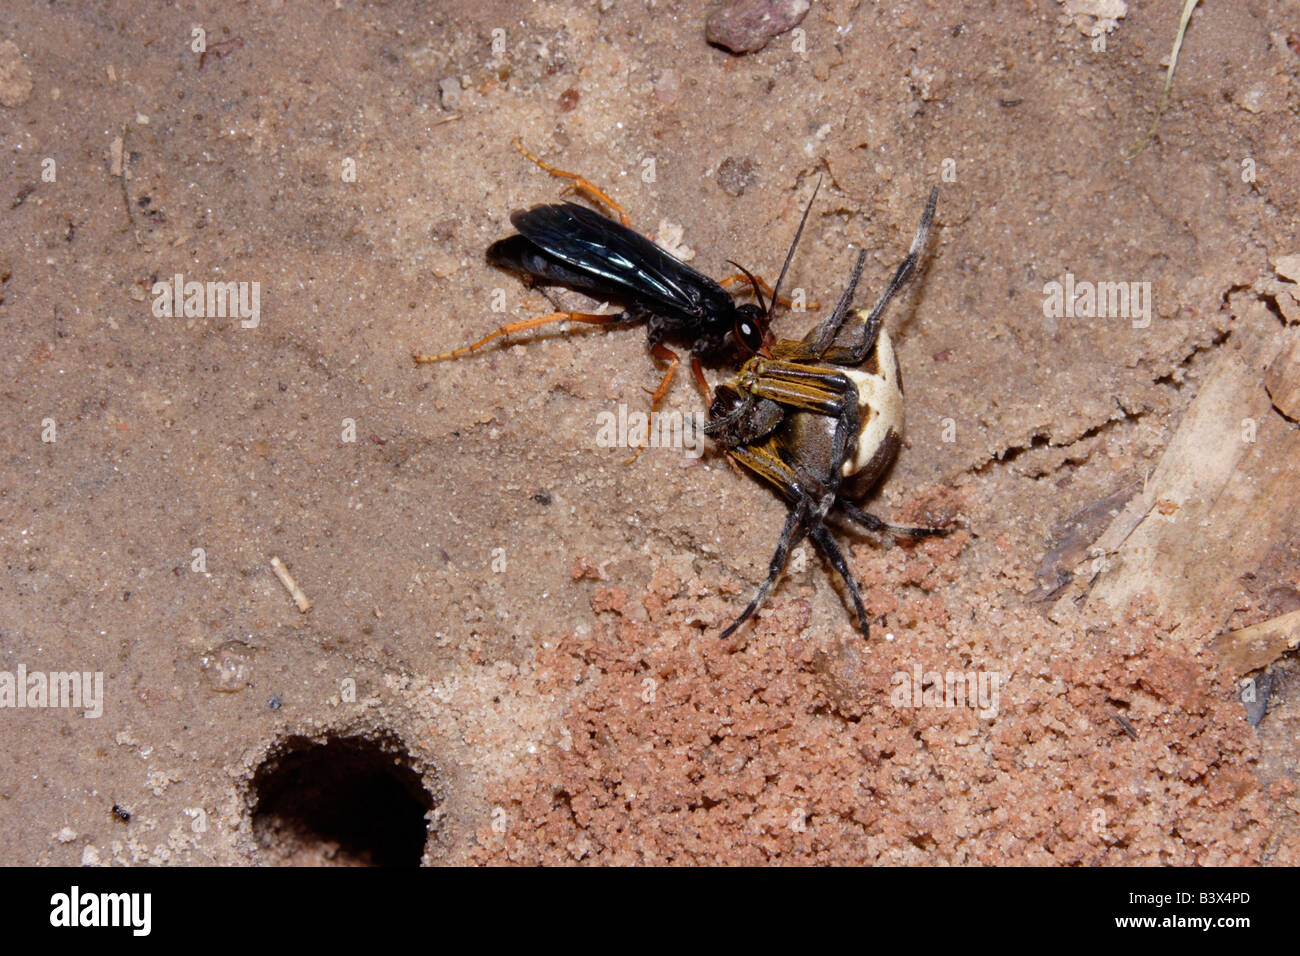 Spider hunting wasp Pompilidae dragging a large orb web spider Megaraneus gabonensis to her burrow in rainforest Ghana Stock Photo